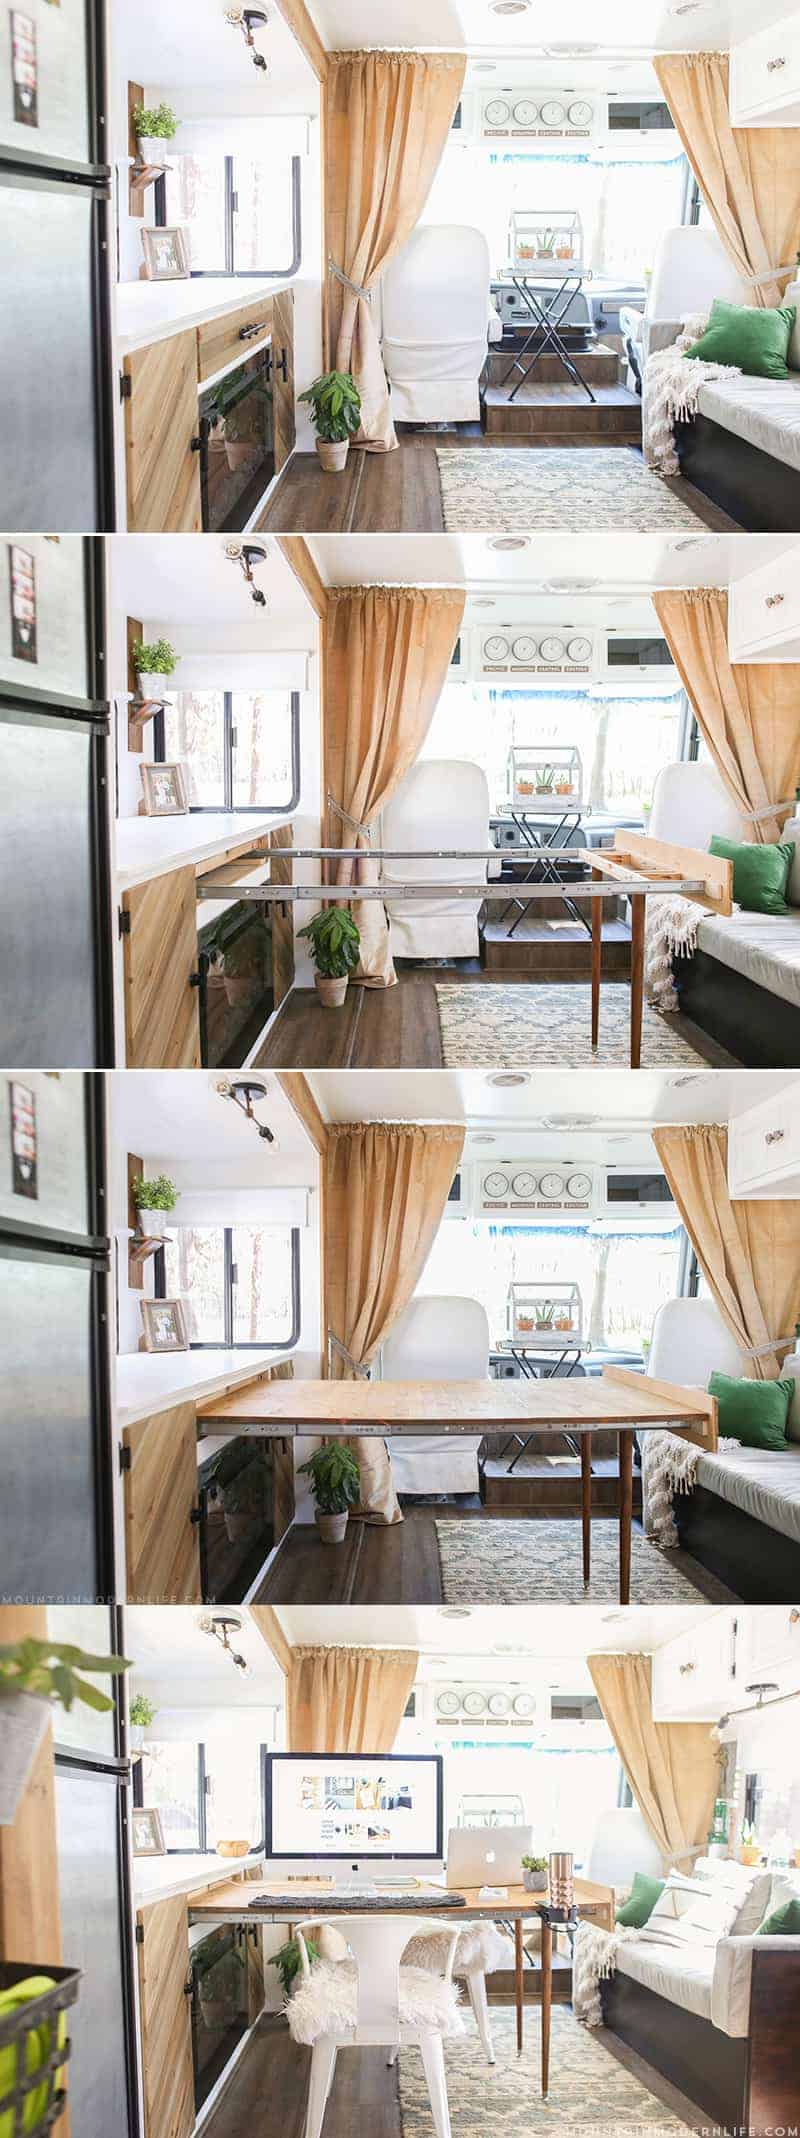 This DIY expanding table can collapse in seconds (and is perfect for RV living!)